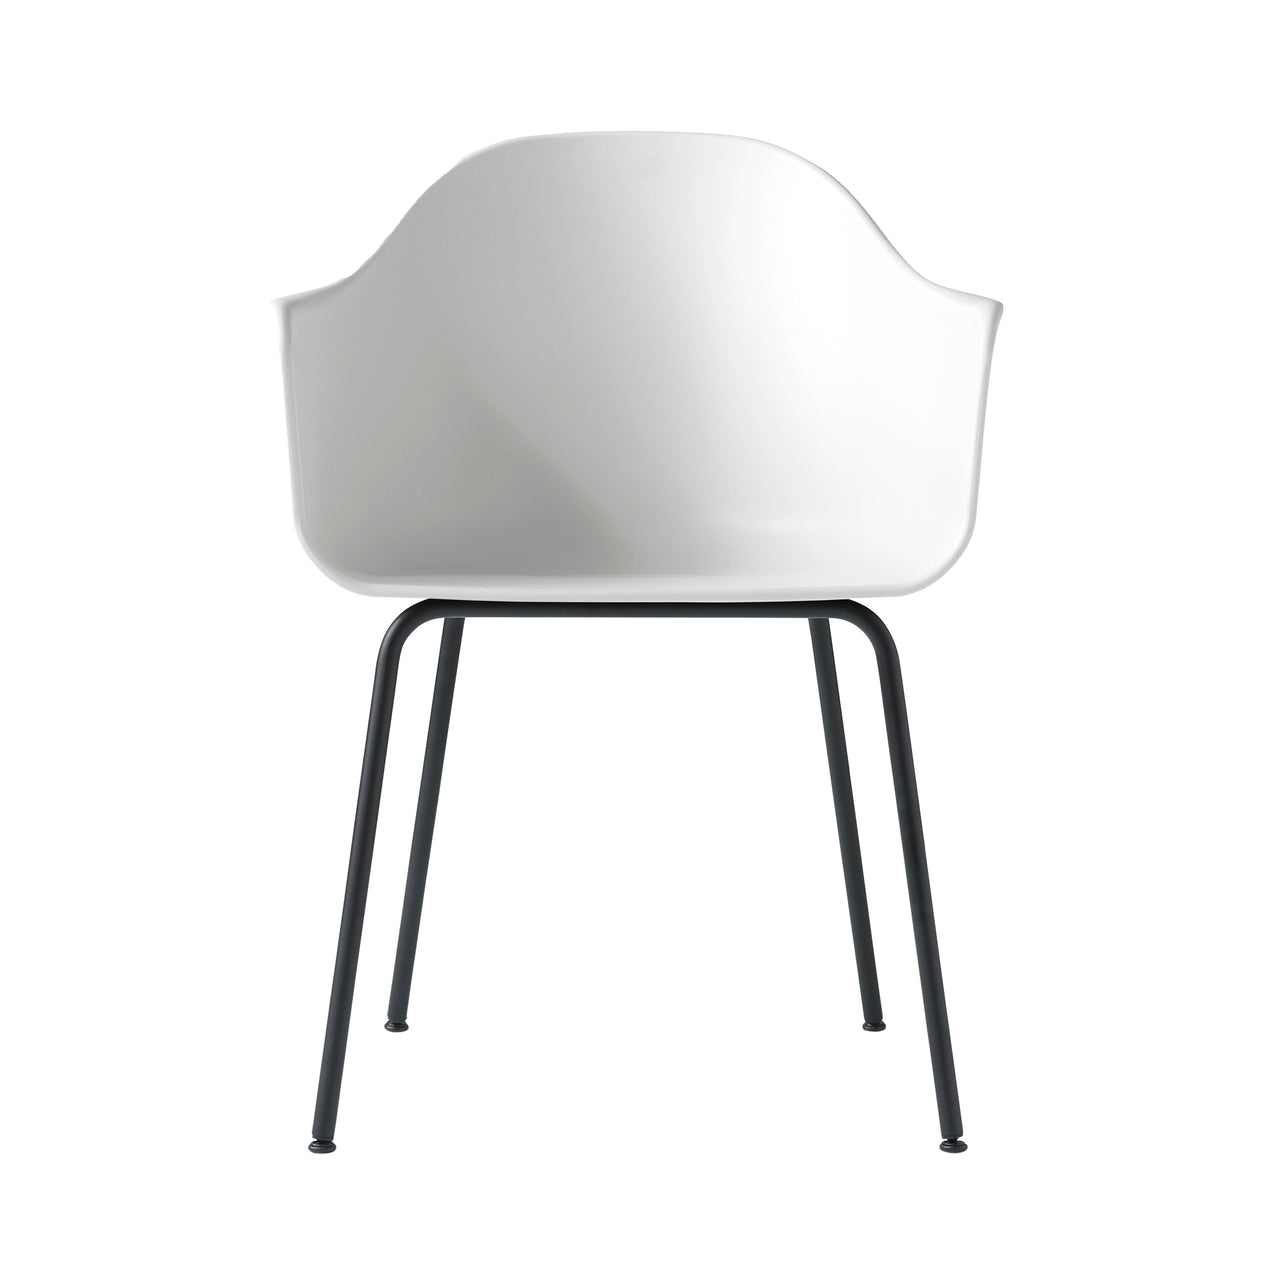 Harbour Dining Chair: Steel Base + White